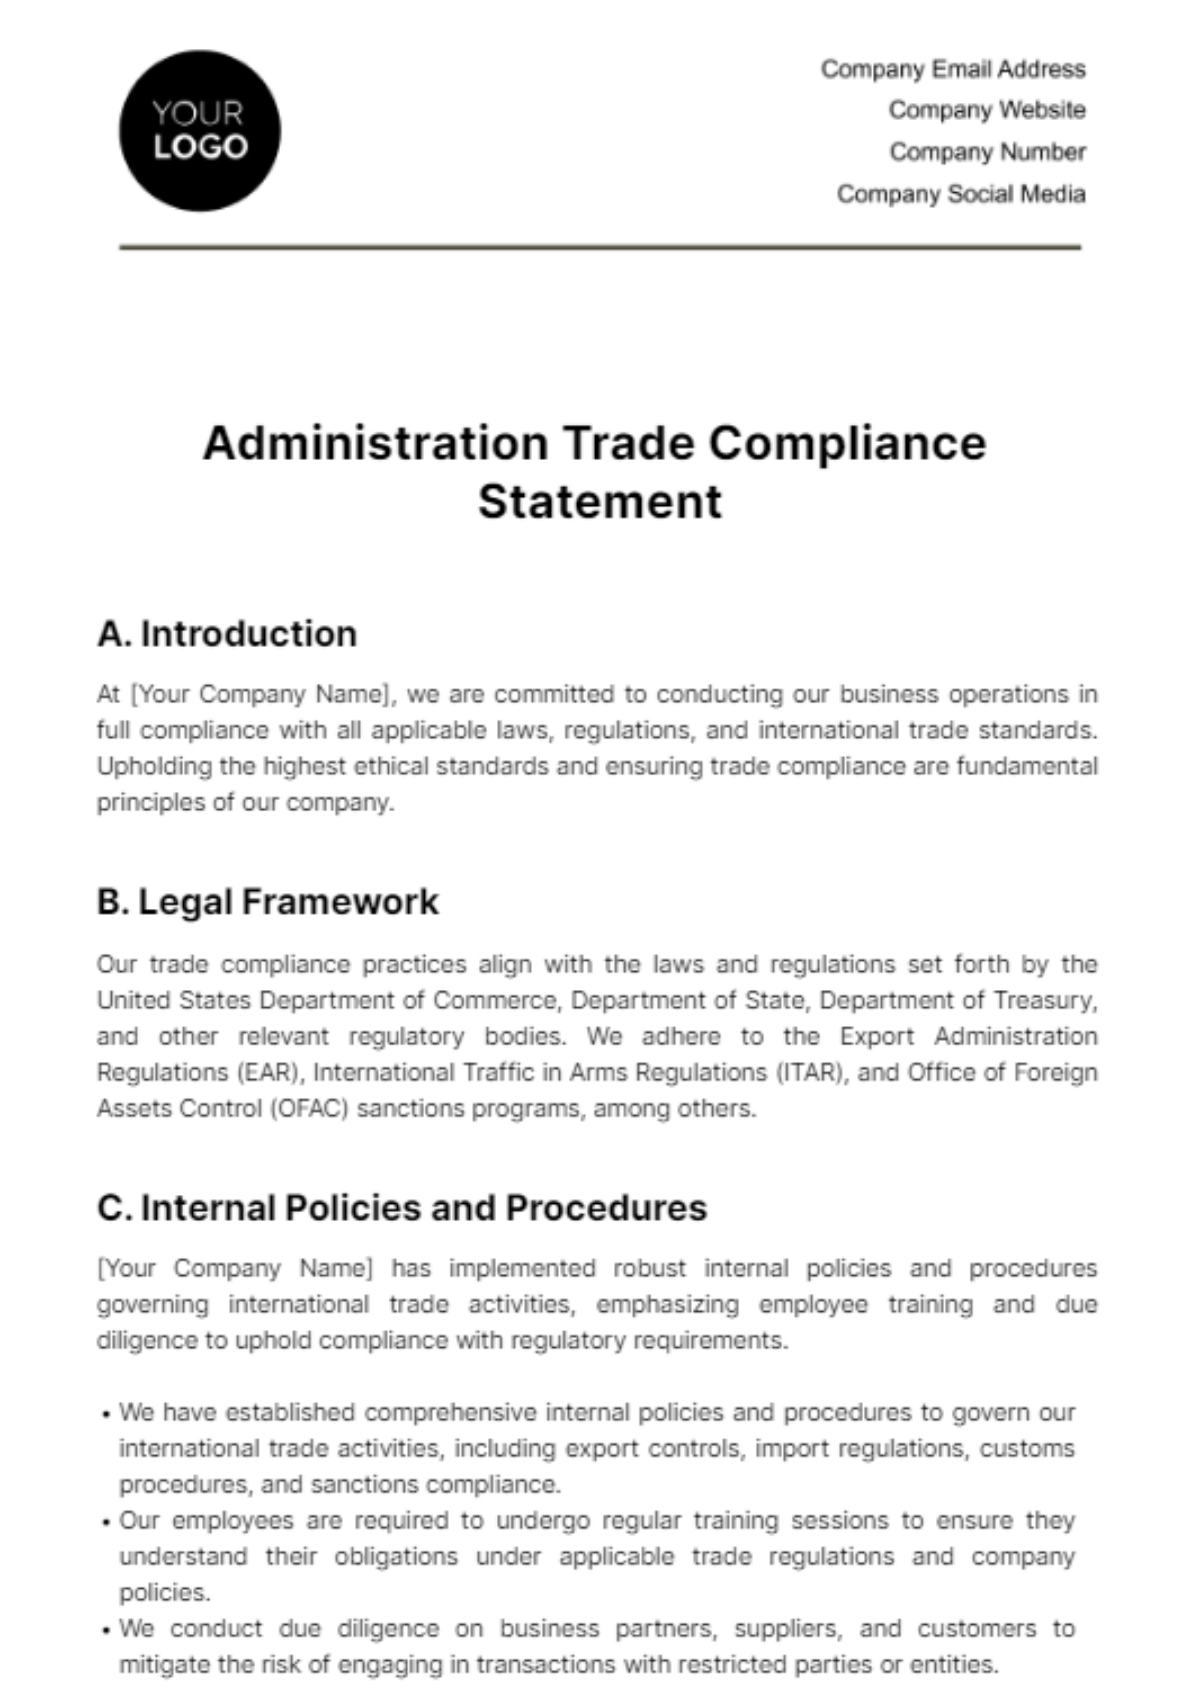 Free Administration Trade Compliance Statement Template